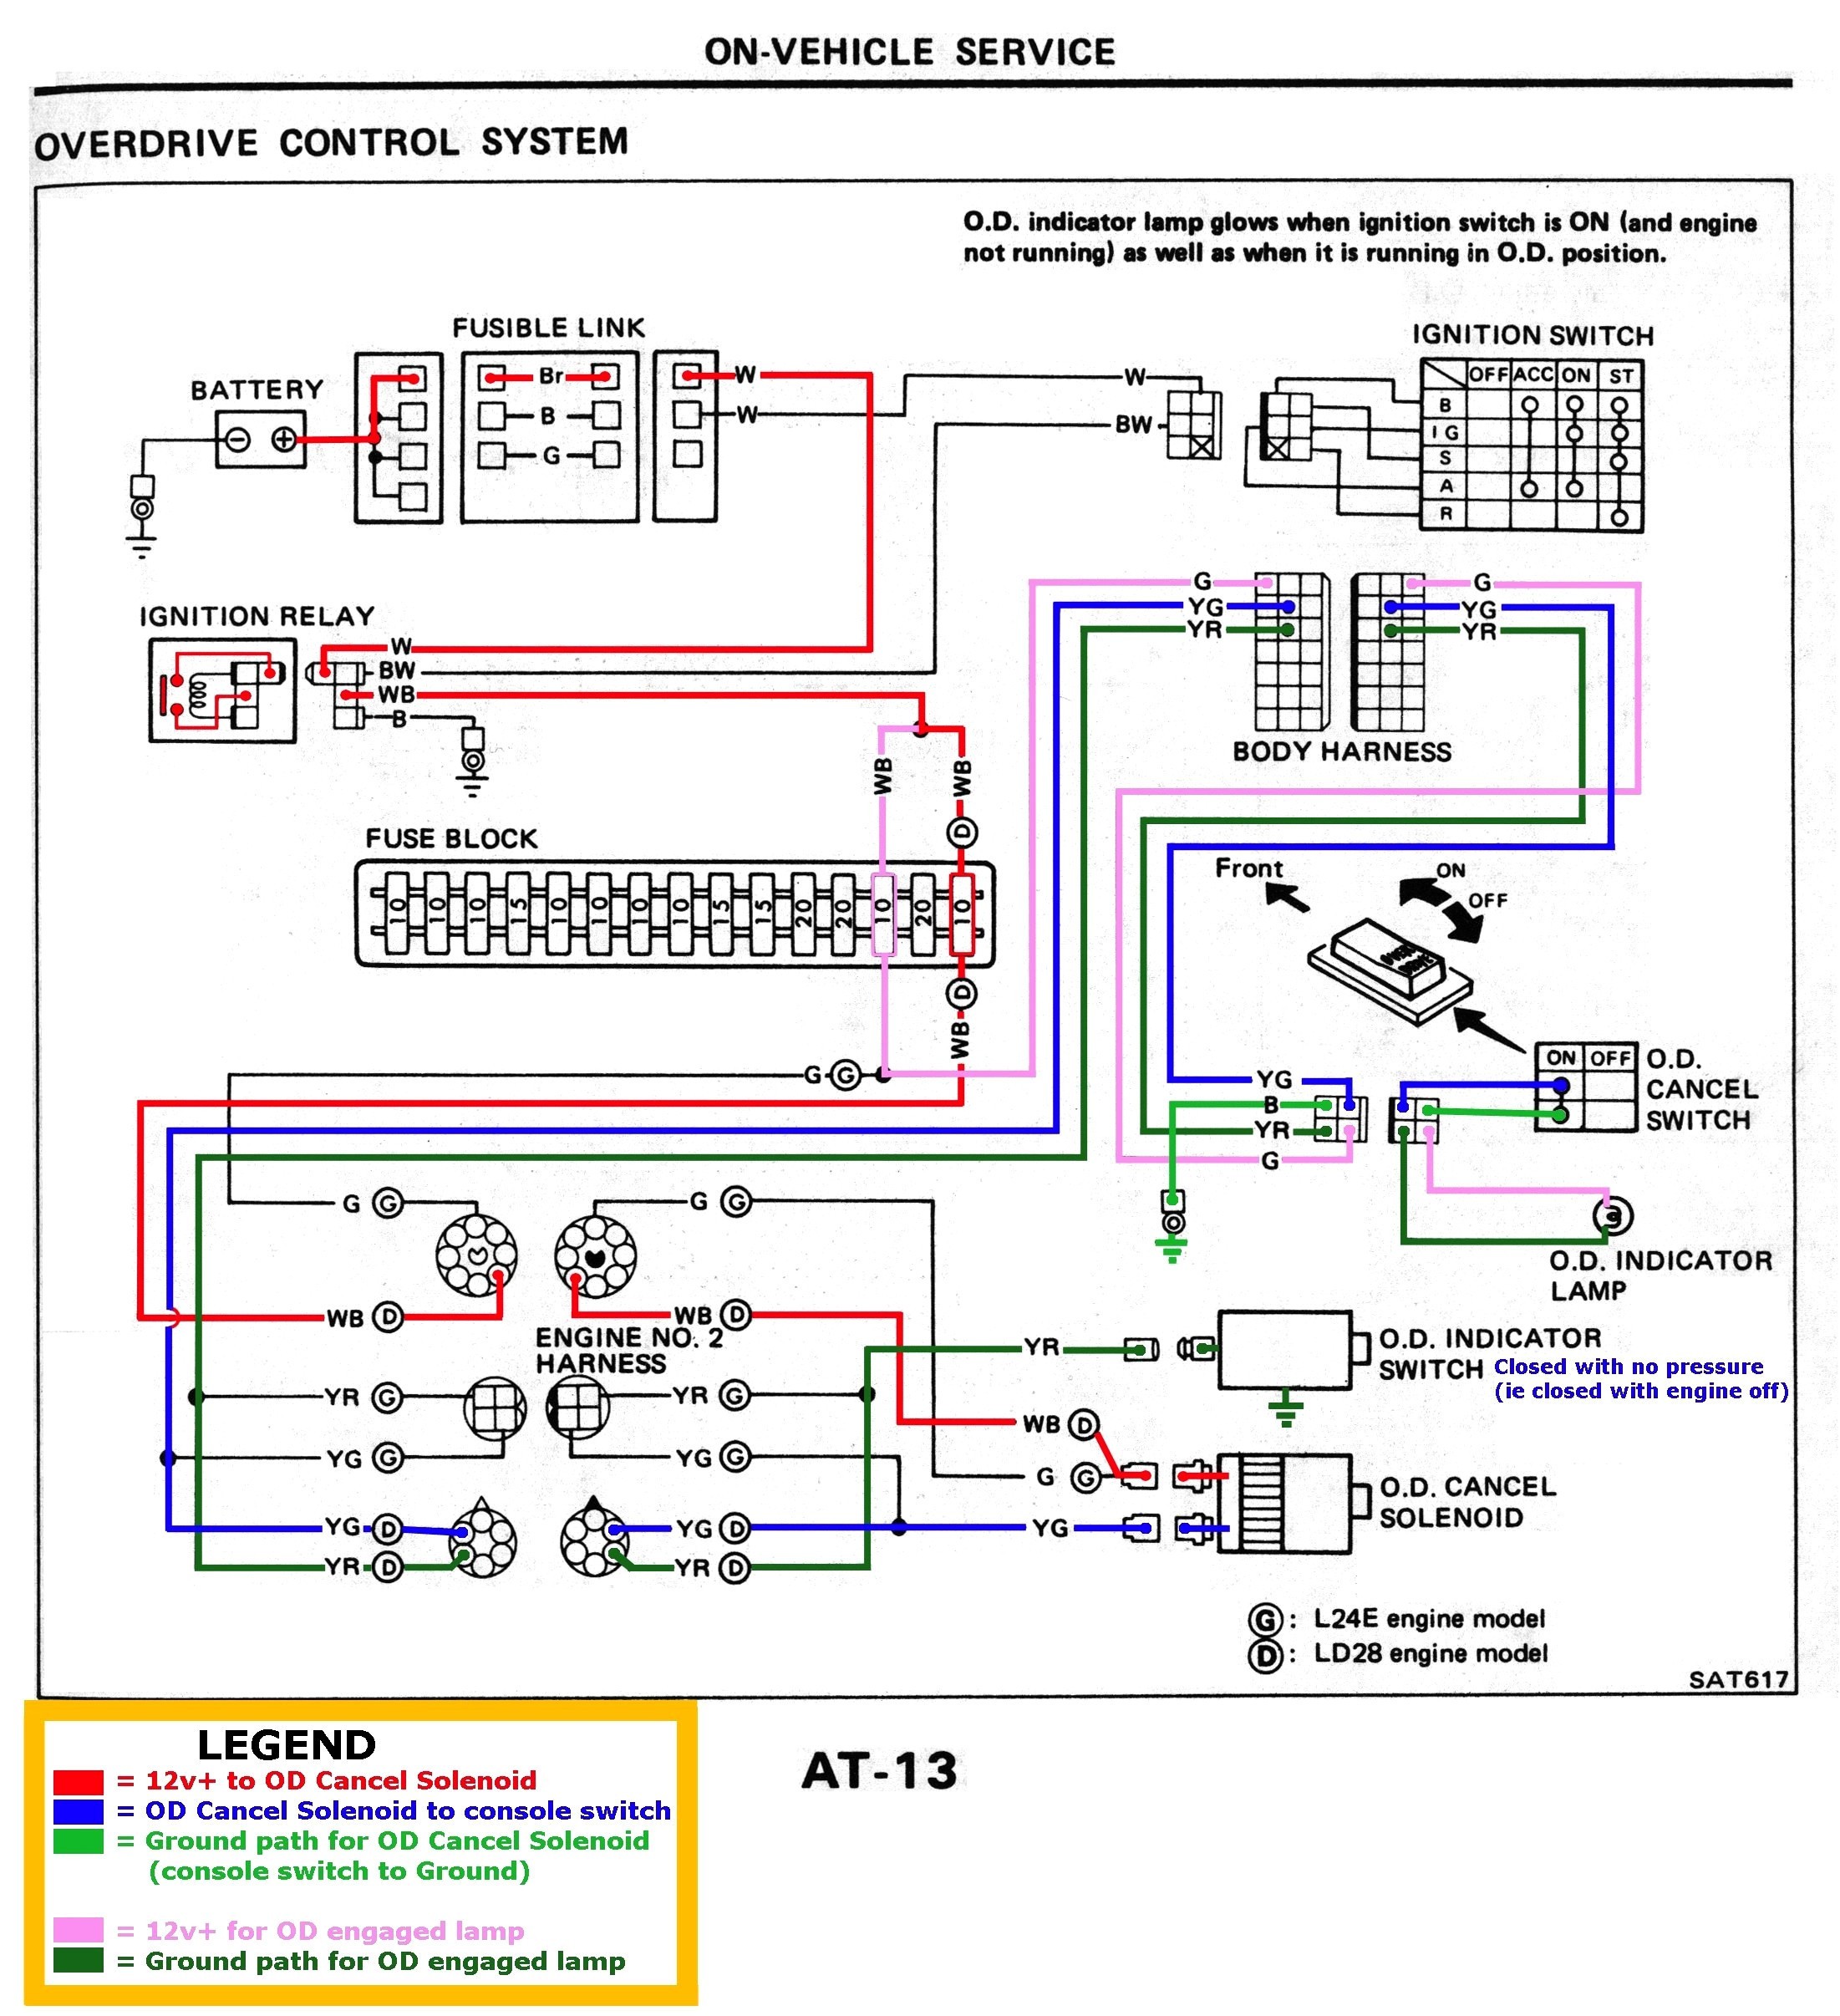 Electrical Schematics Explained Wiring Diagram Explained New Split Unit Wiring Diagram Electrical Schematics Explained